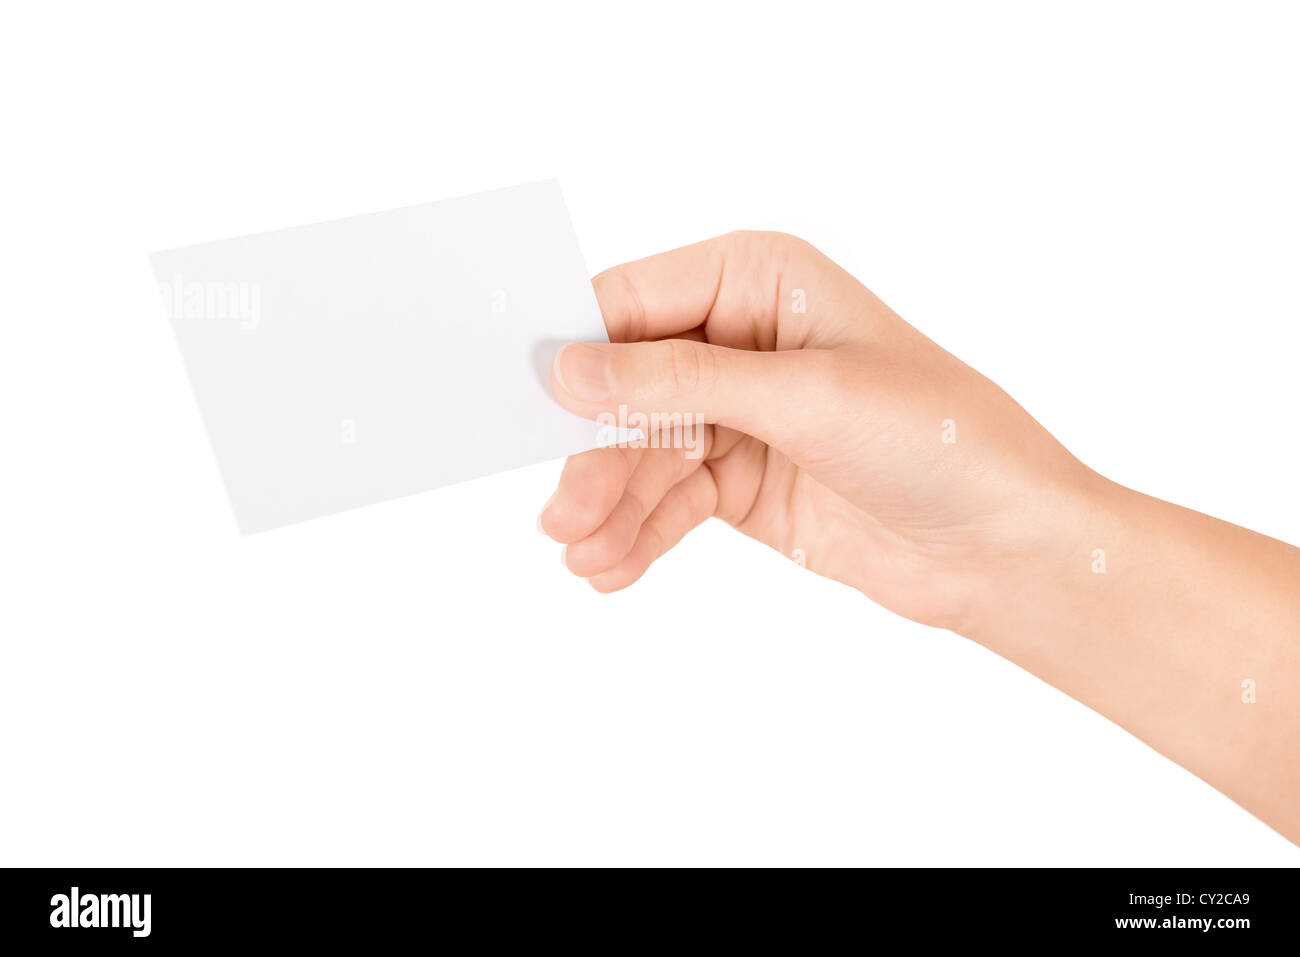 Hand holding blank business card. Isolé sur blanc. Banque D'Images